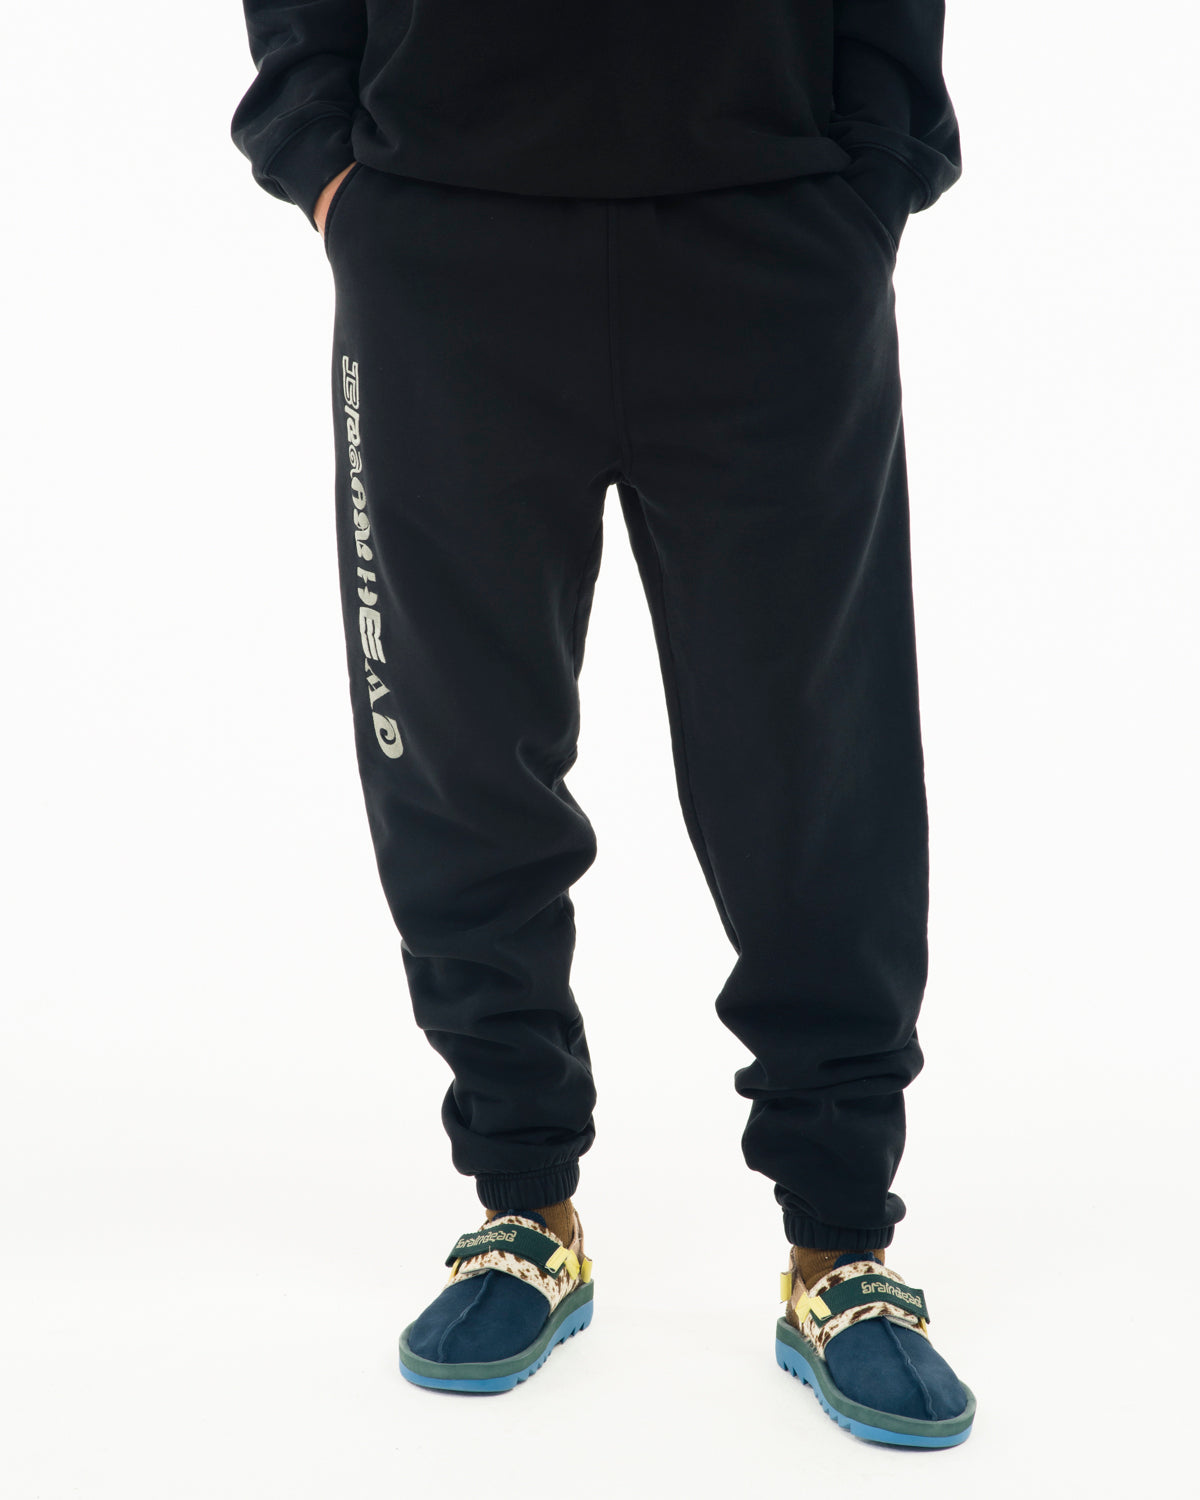 Heavyweight Embroidered Sweatpants - Black 4